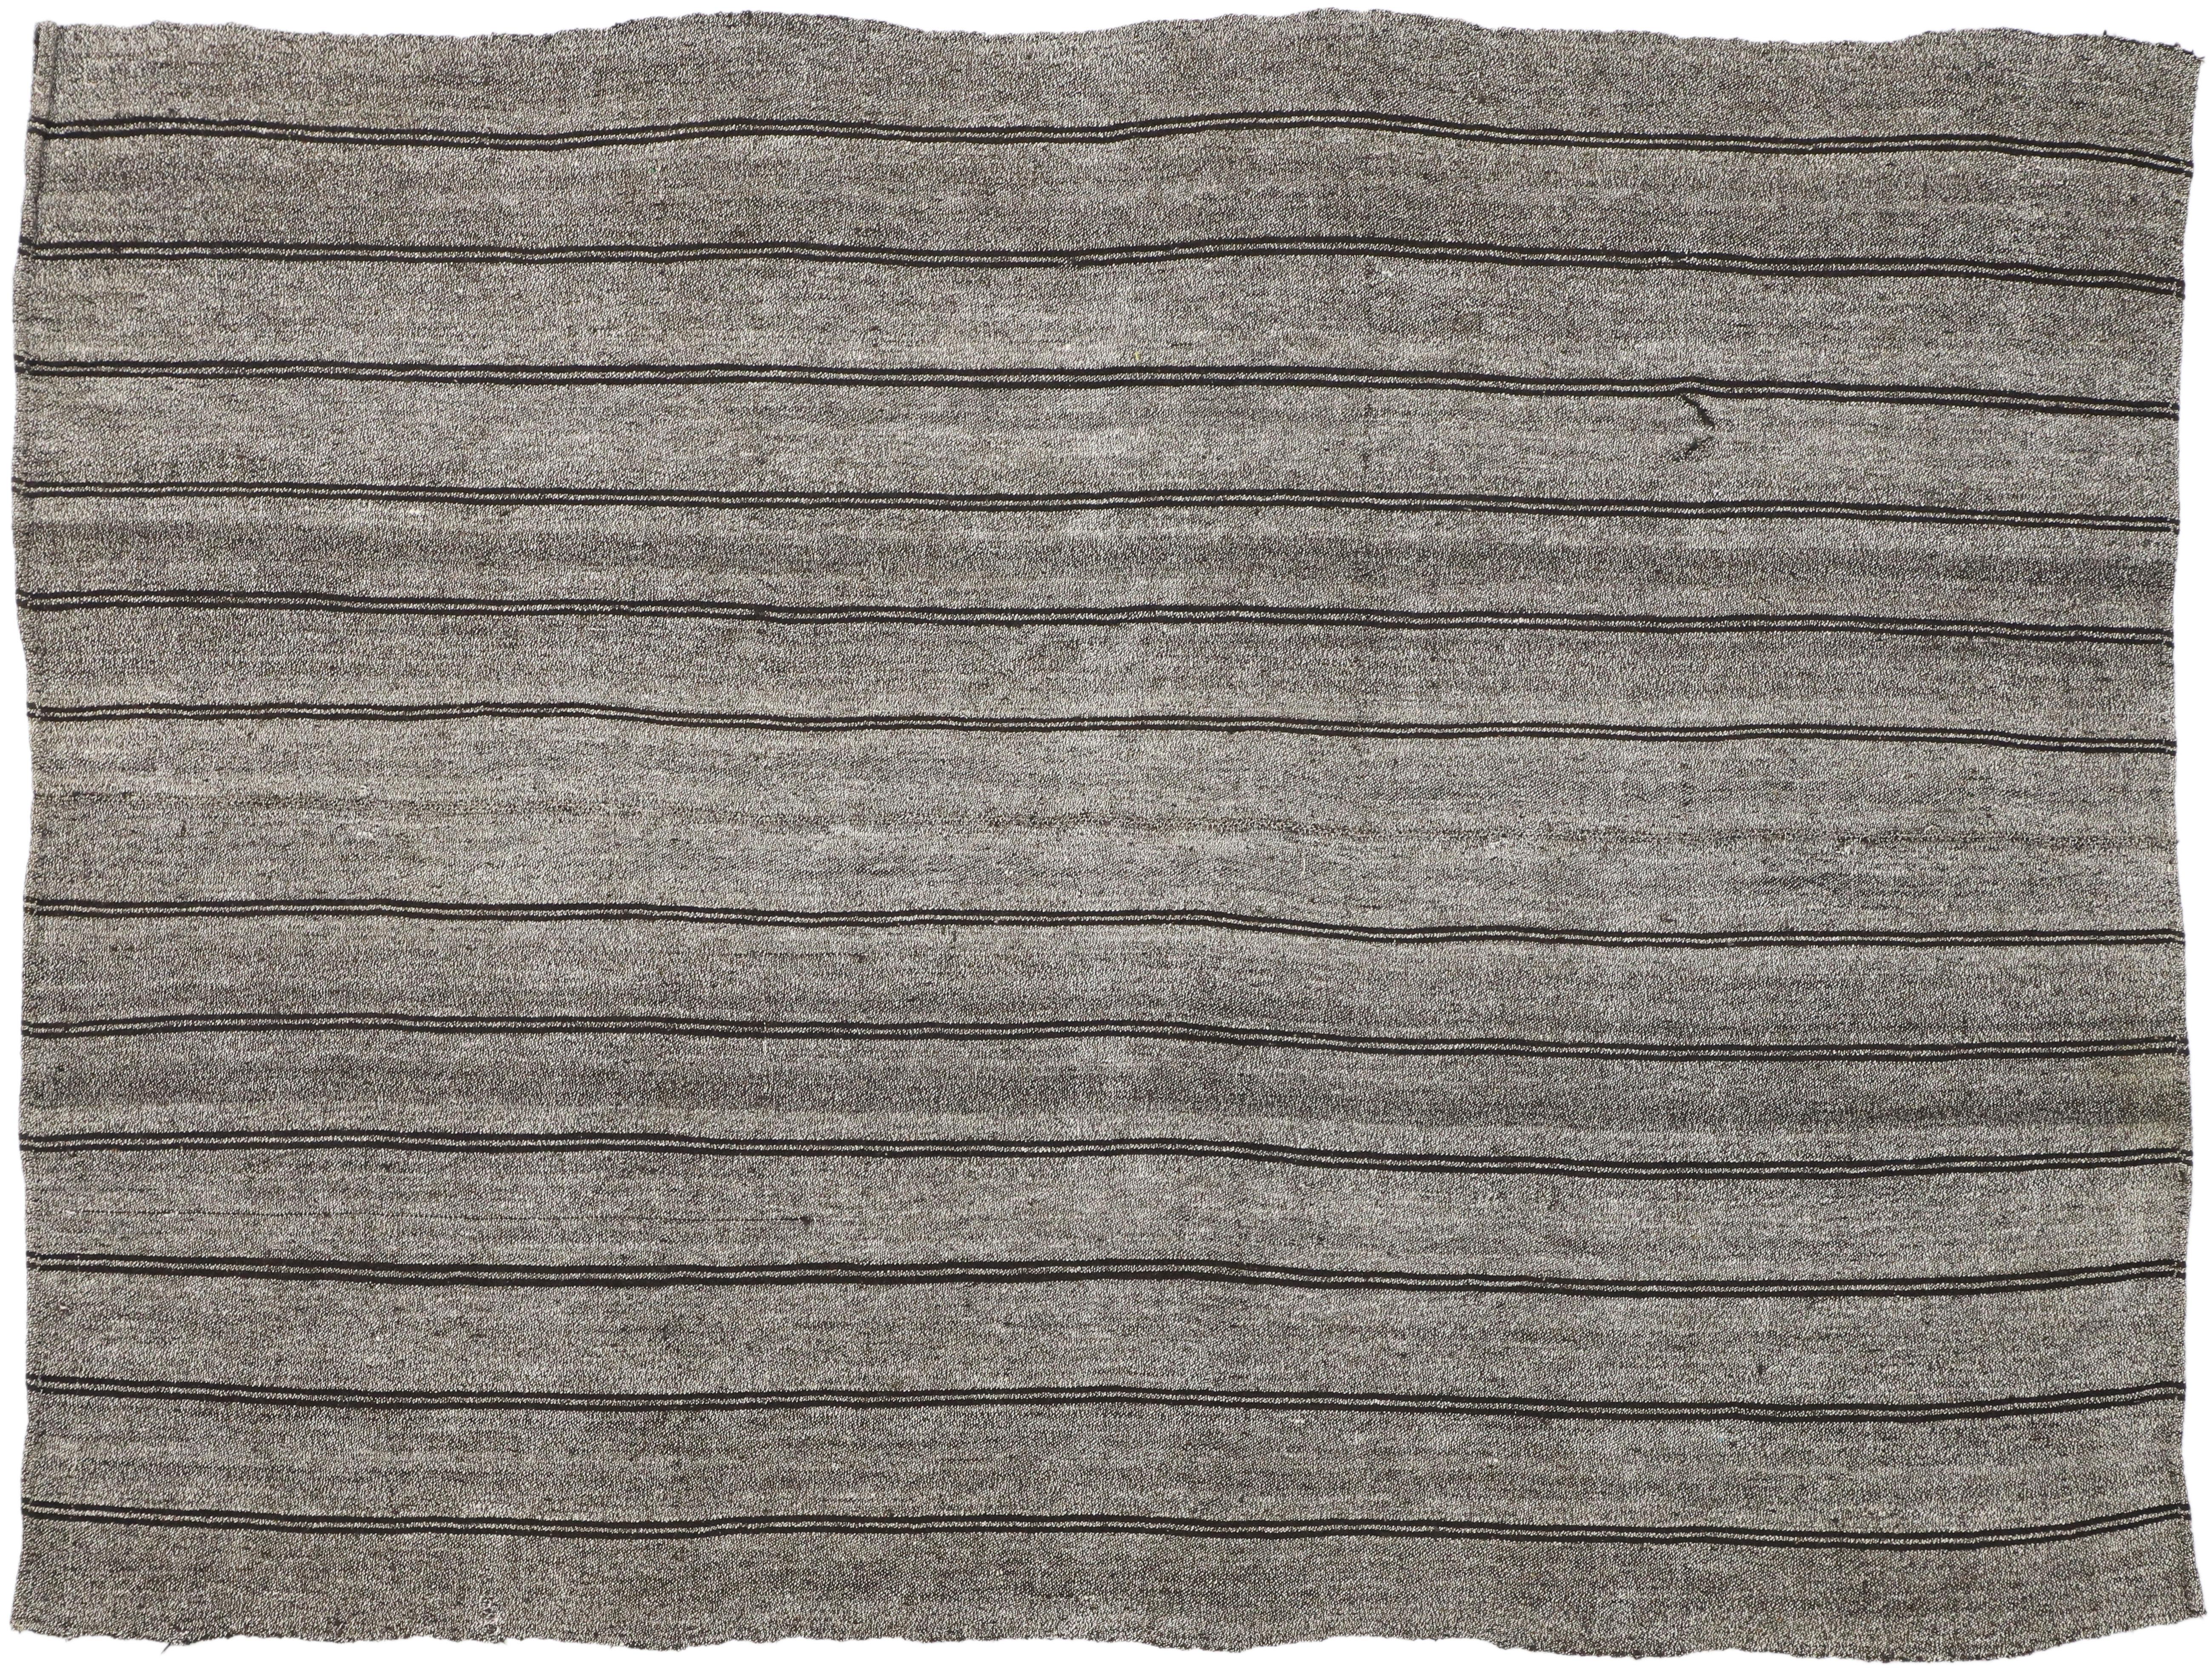 50898 Vintage Turkish Striped Kilim Rug with Modern Industrial Style 06'09 x 09'00. Simplicity meets incredible detail and texture in this hand-woven vintage Turkish Kilim rug. The abrashed gray field features pairs of thin black stripes running the